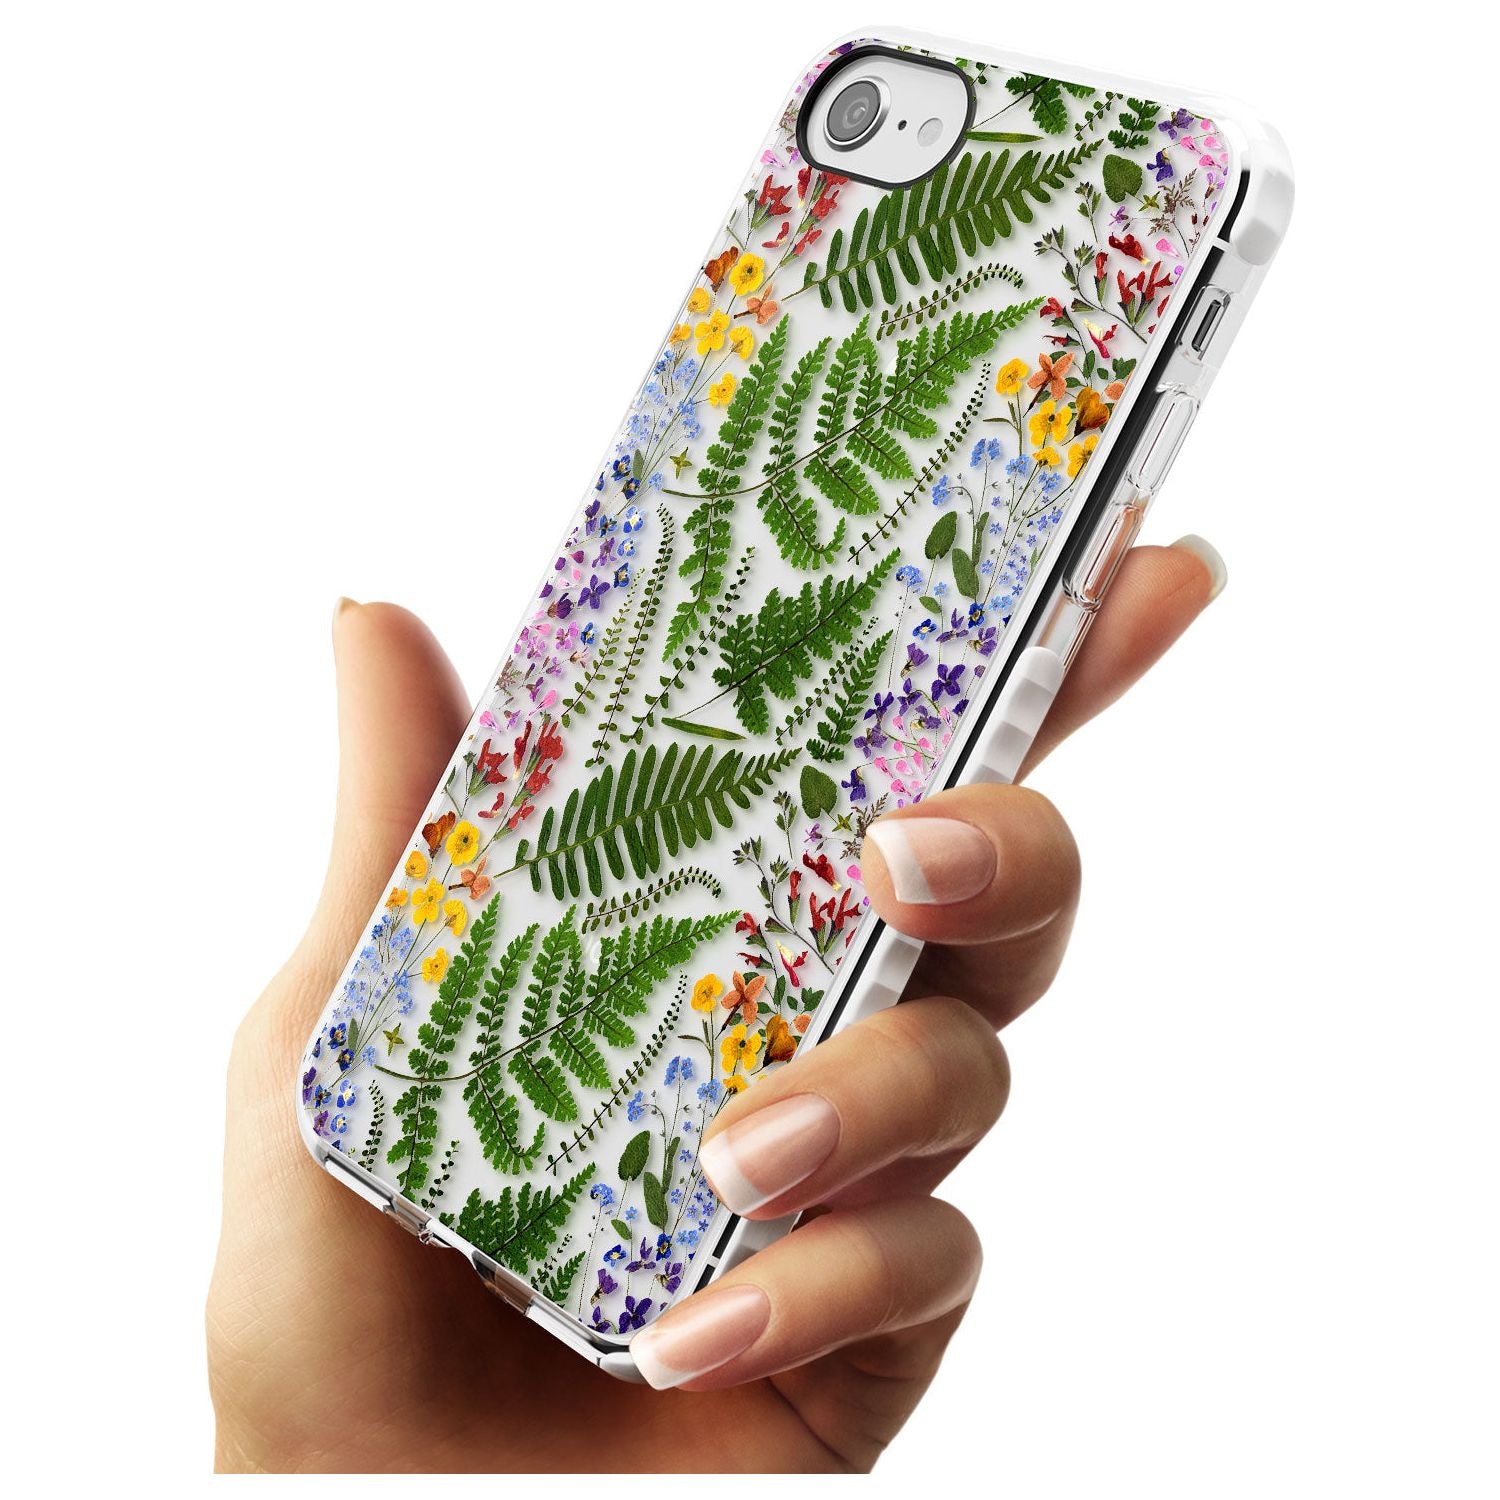 Busy Floral and Fern Design Impact Phone Case for iPhone SE 8 7 Plus